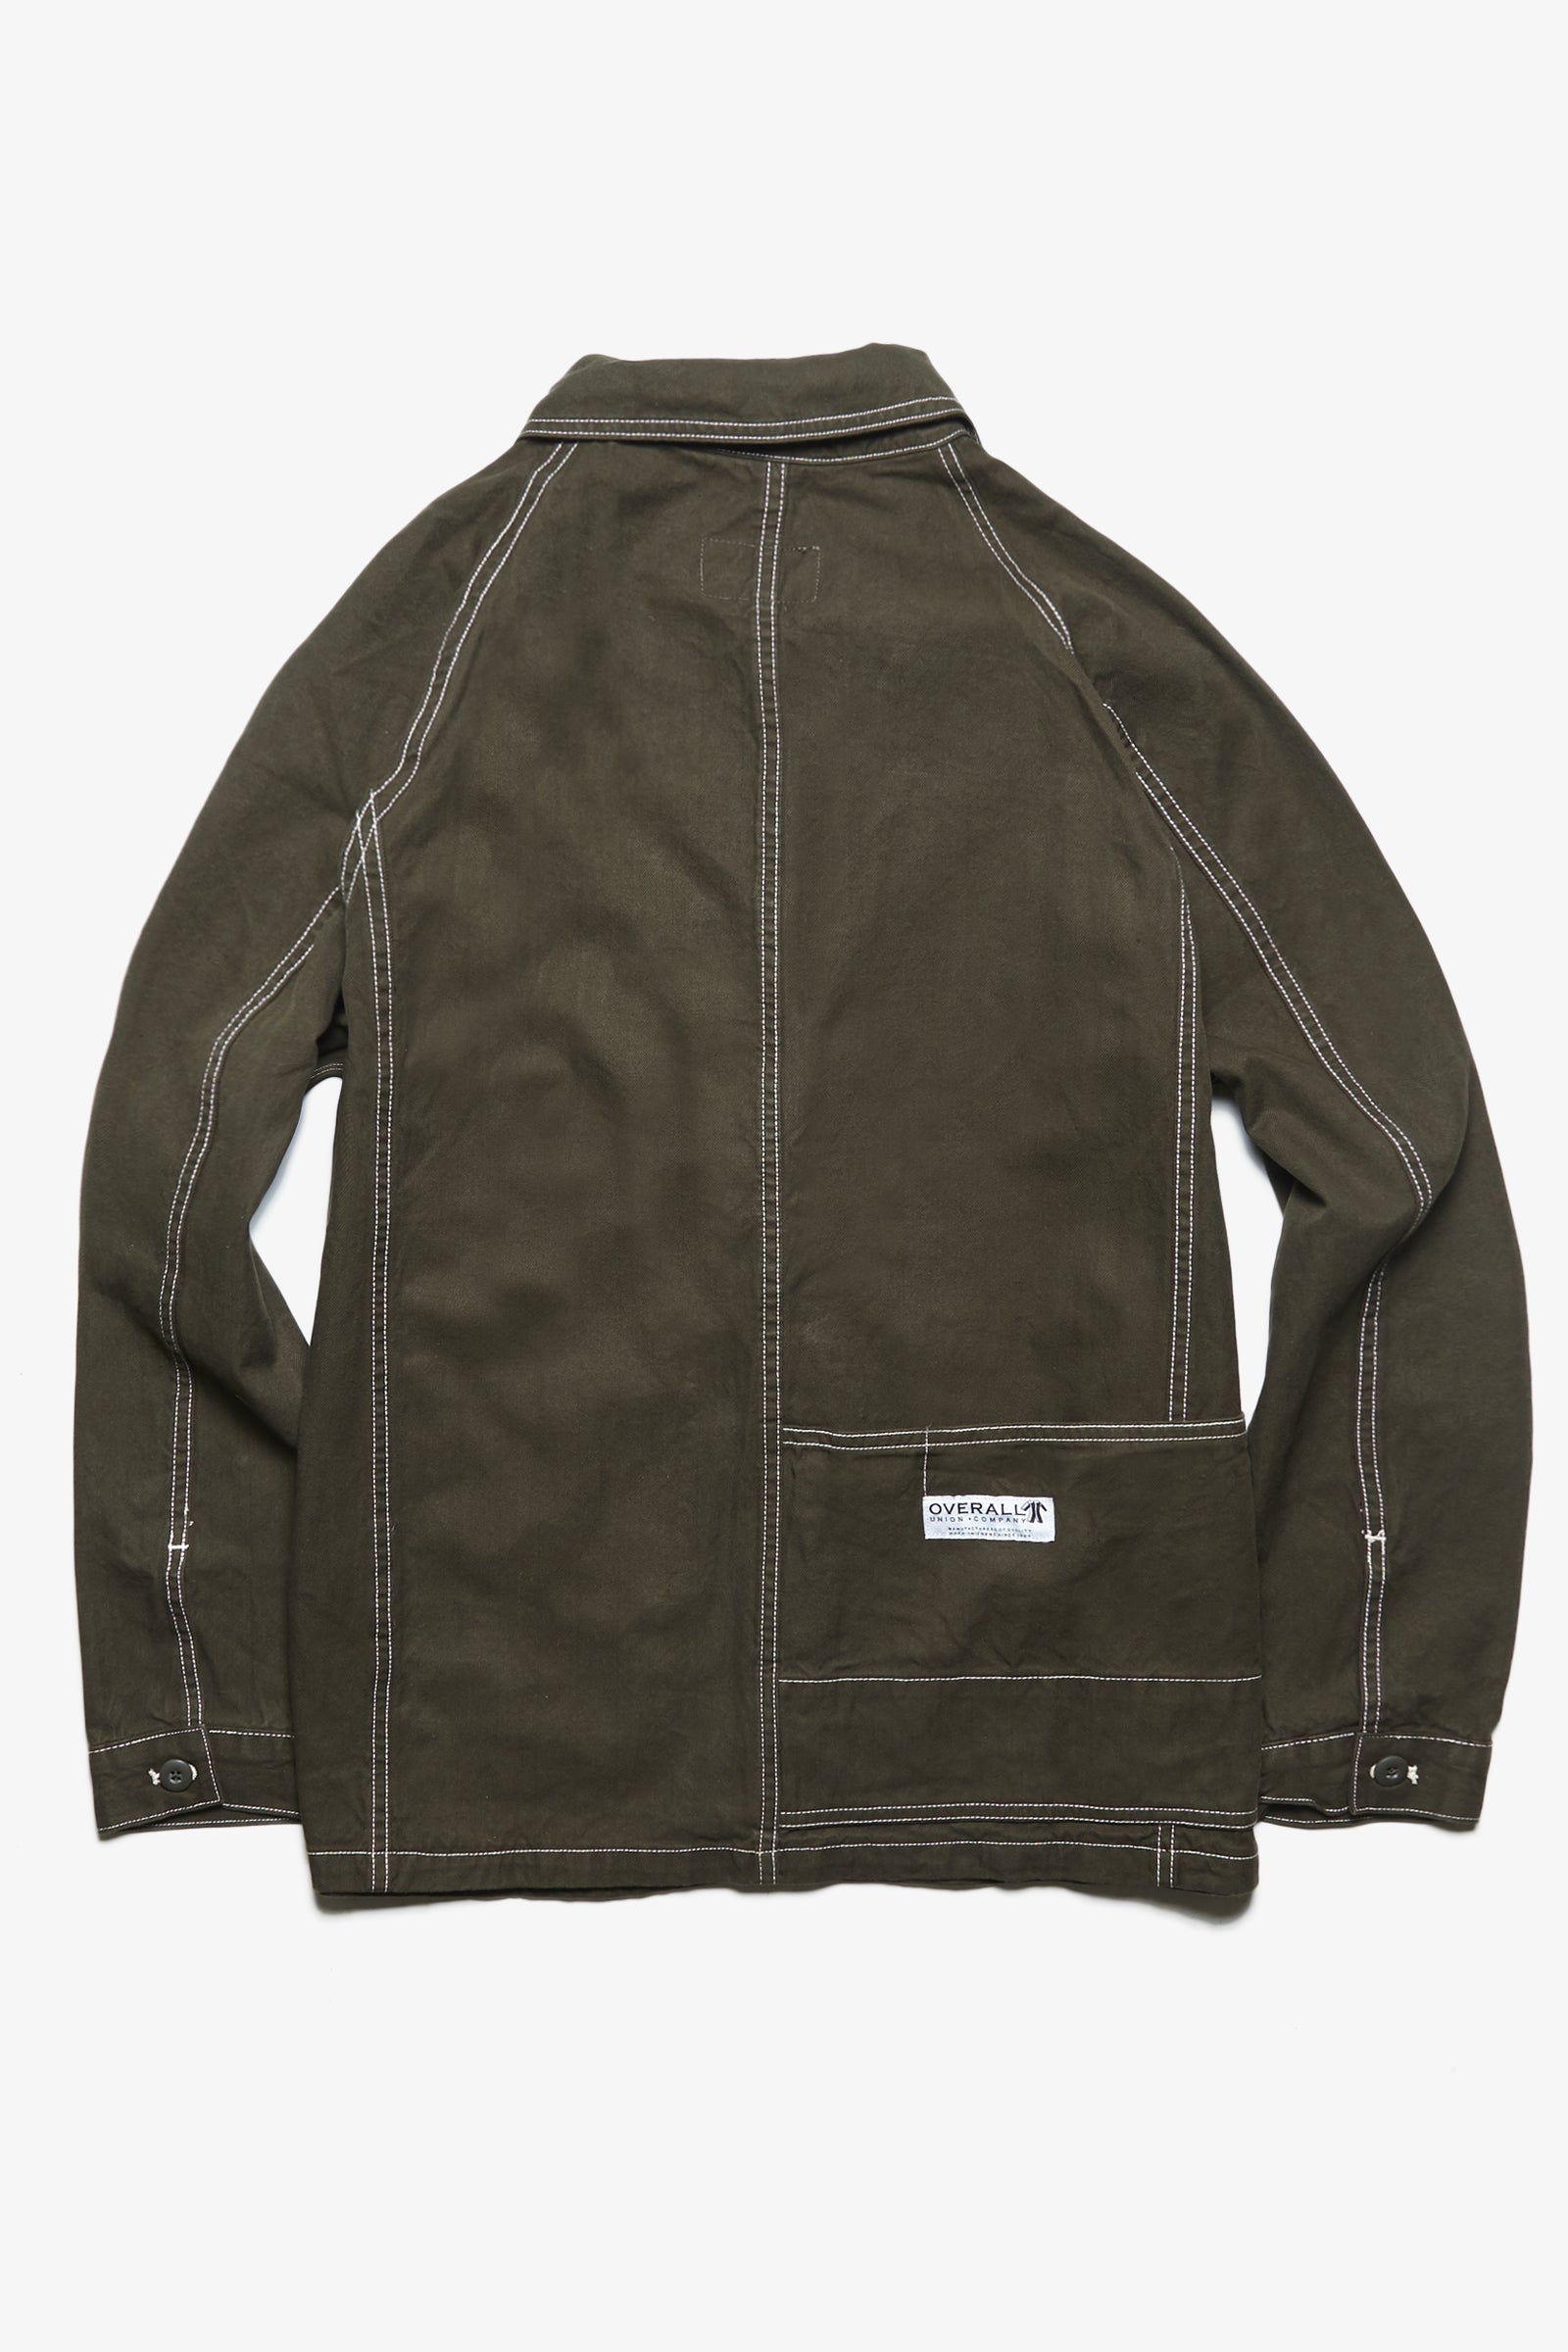 Overall Union - Workshop Chore Coat - Army